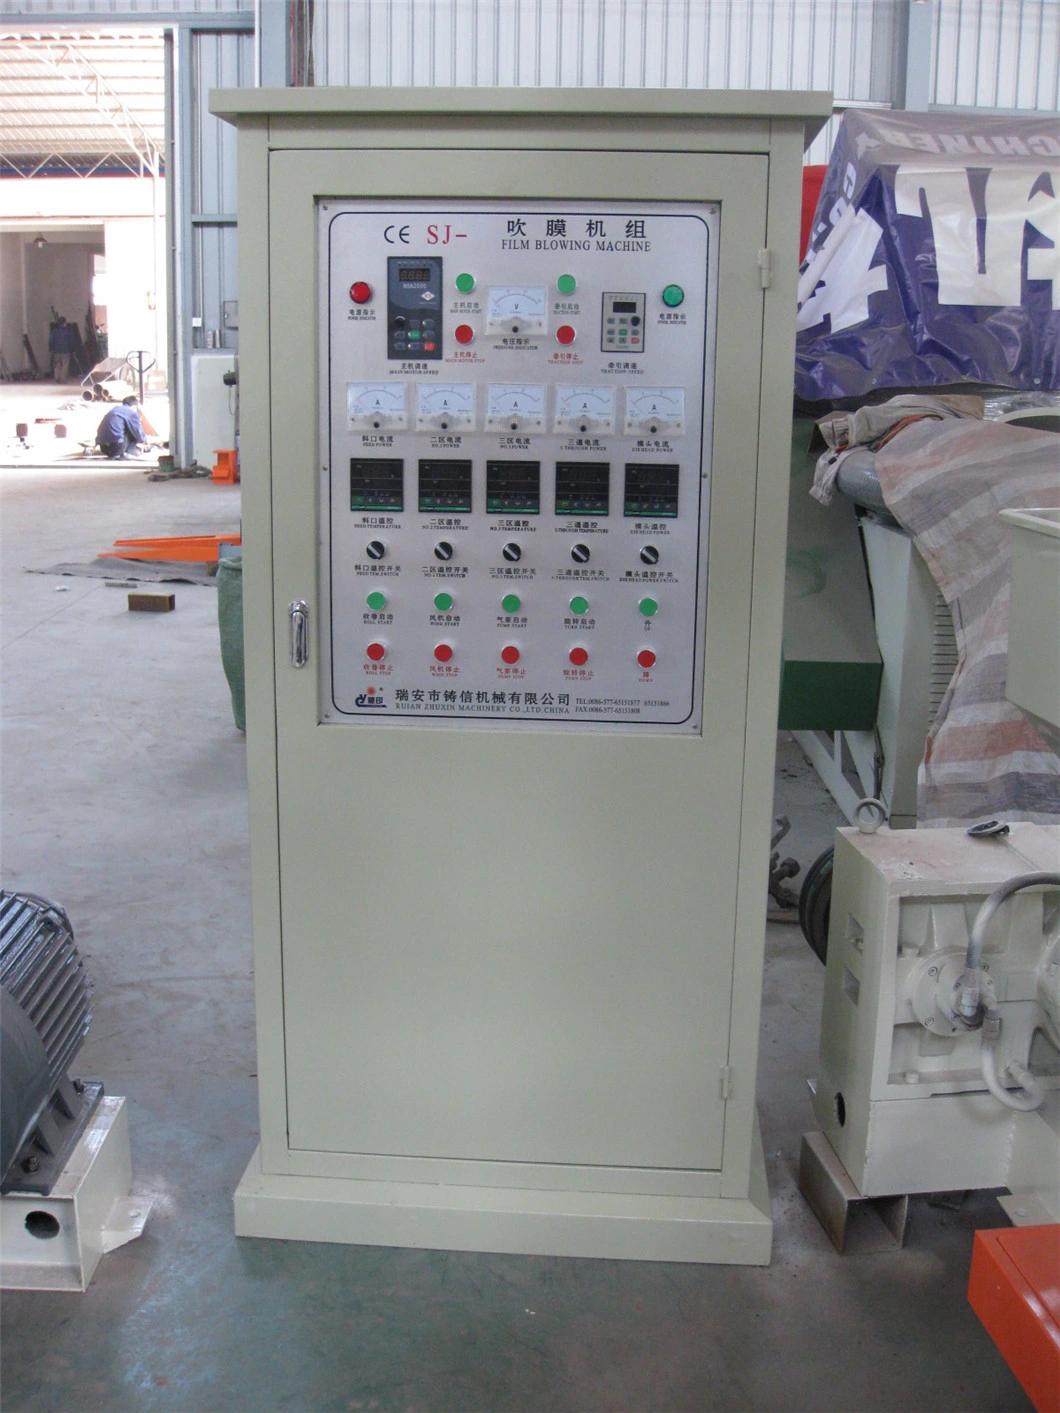 HDPE Lifting Frame Film Blowing Machine with Autoloader, mechanical Screen Changer